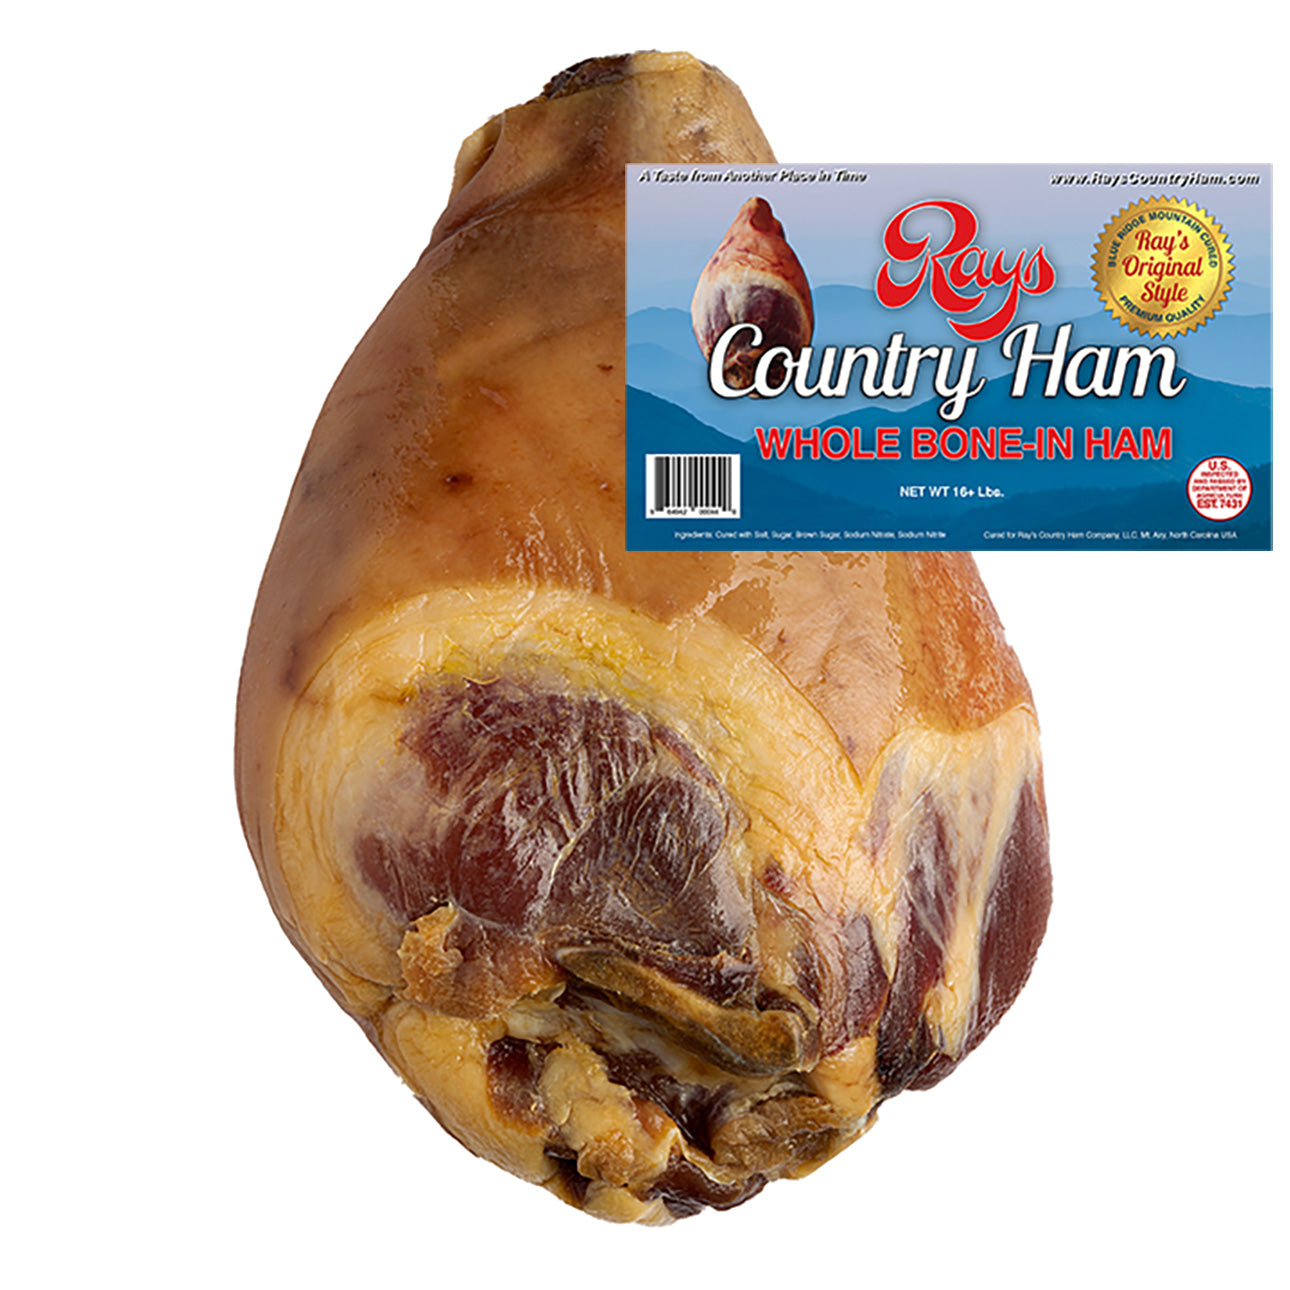 rays-country-ham-16-lb-whole-bone-in-country-ham-blue-ridge-mountain-cured